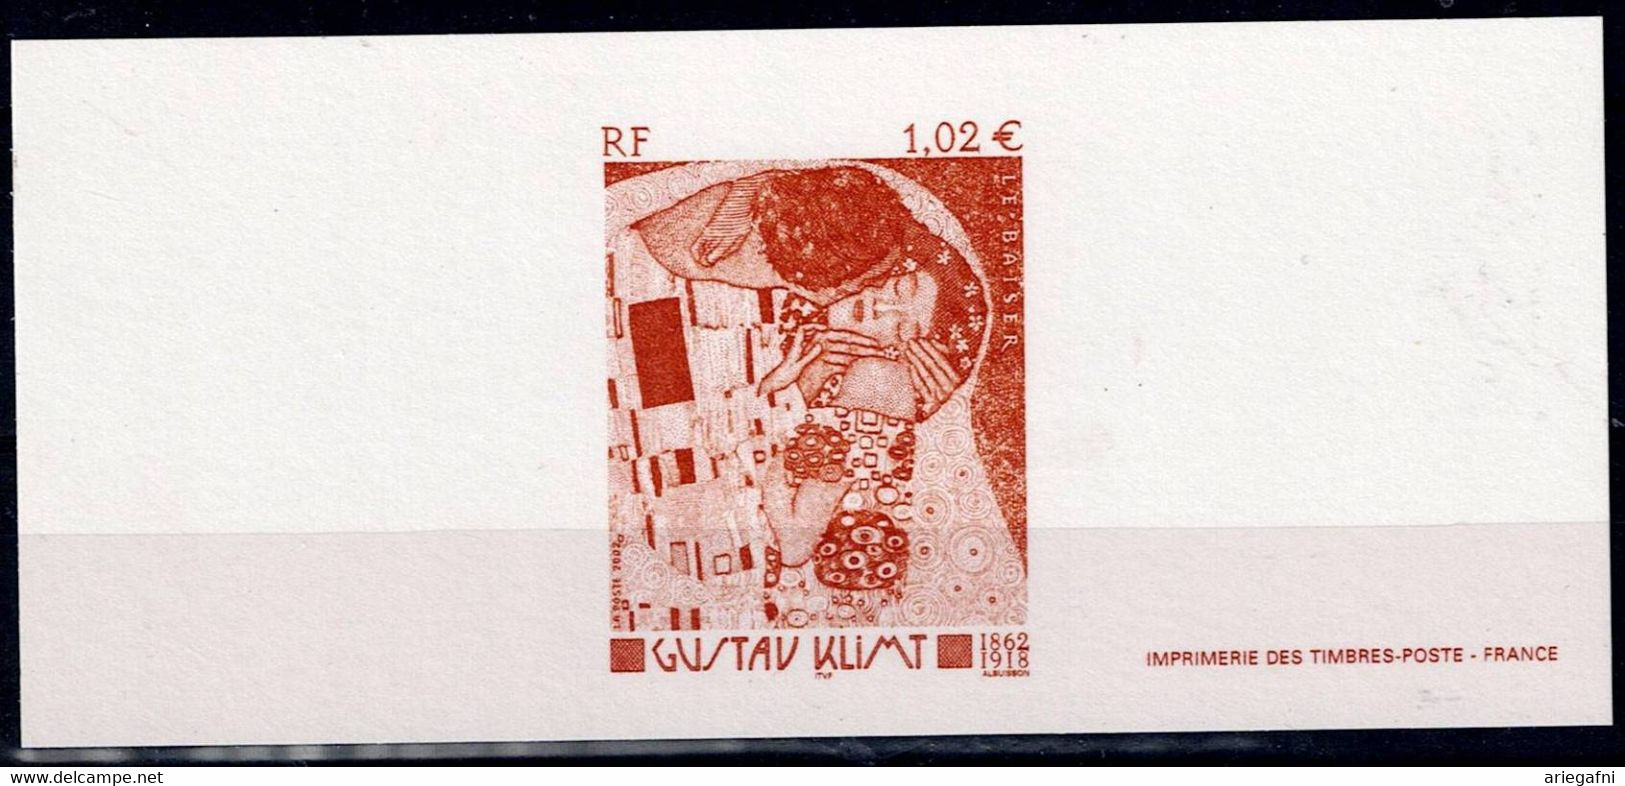 FRANCE 2002 PAINTING DELUXE BLOCK PROOF MNH VF!! - Proofs, Unissued, Experimental Vignettes